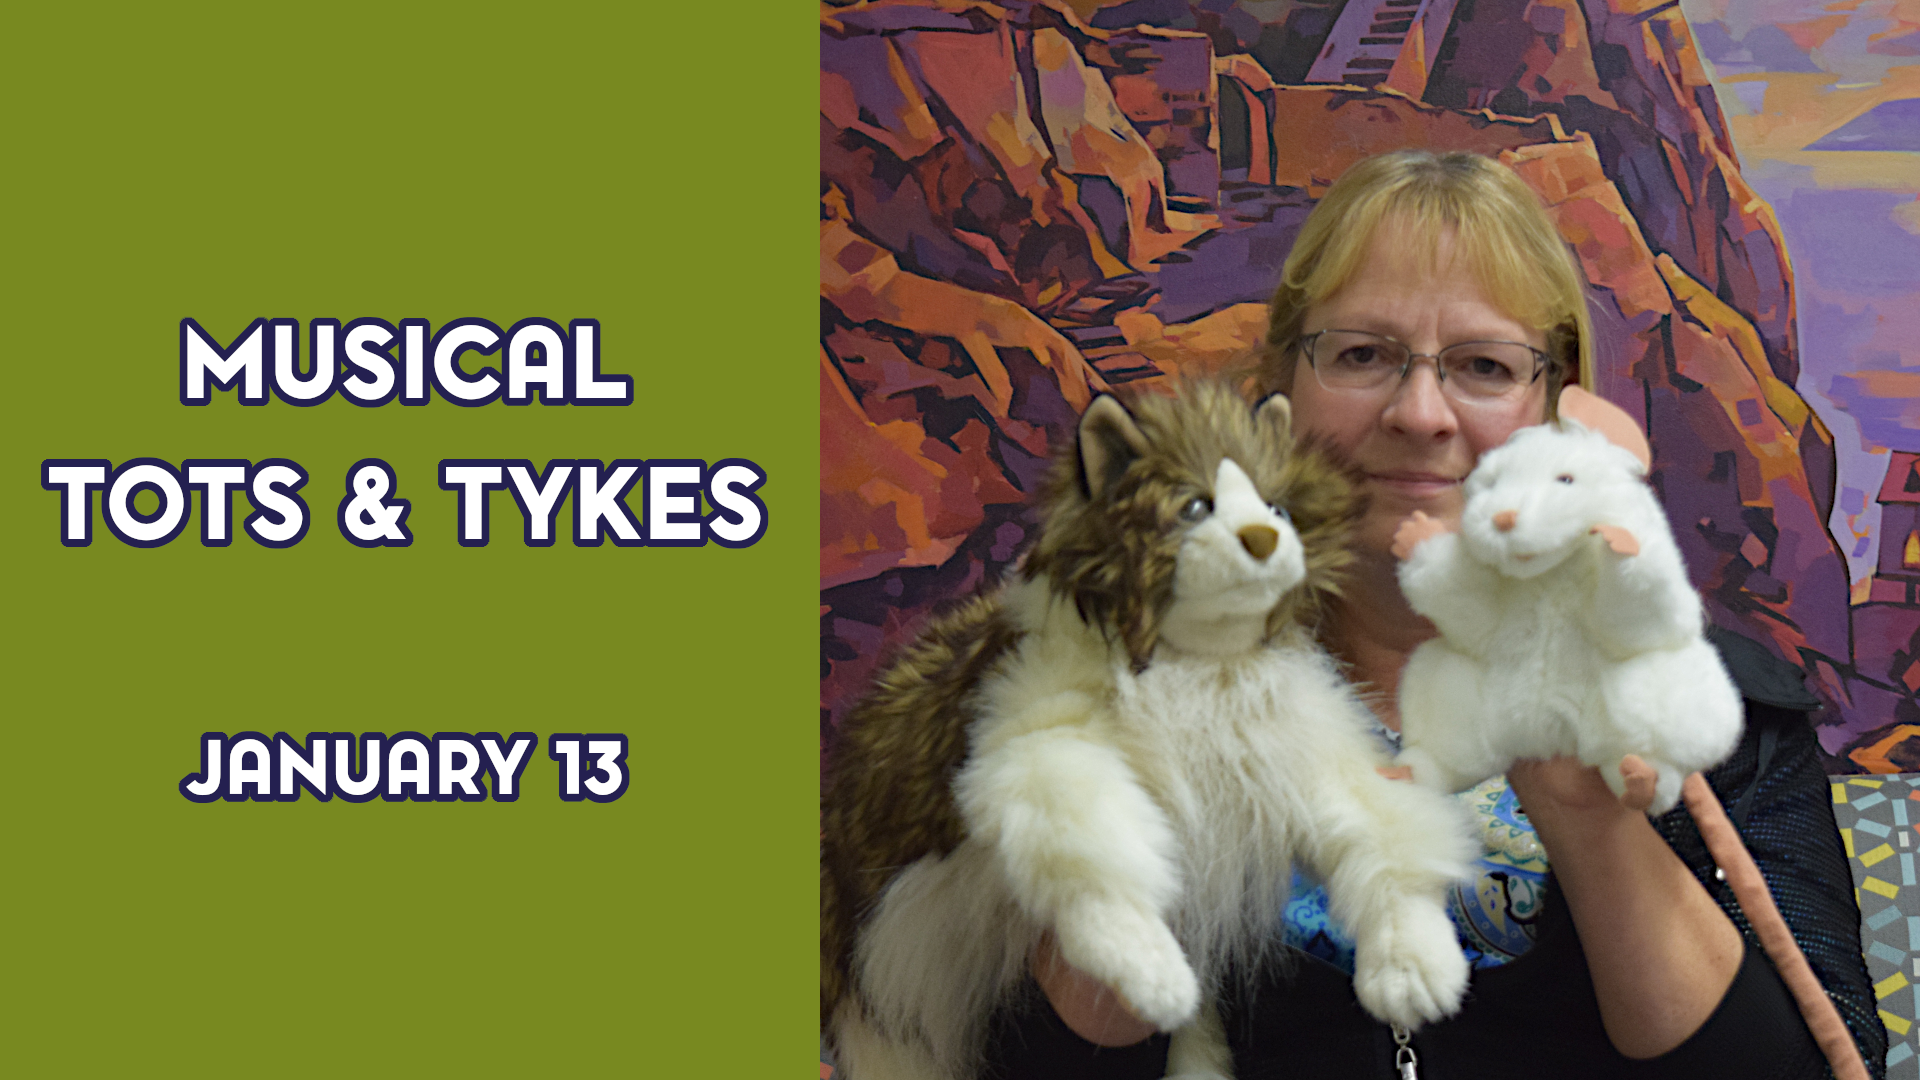 A woman holds up puppets next to the text "Musical Tots & Tykes January 13"